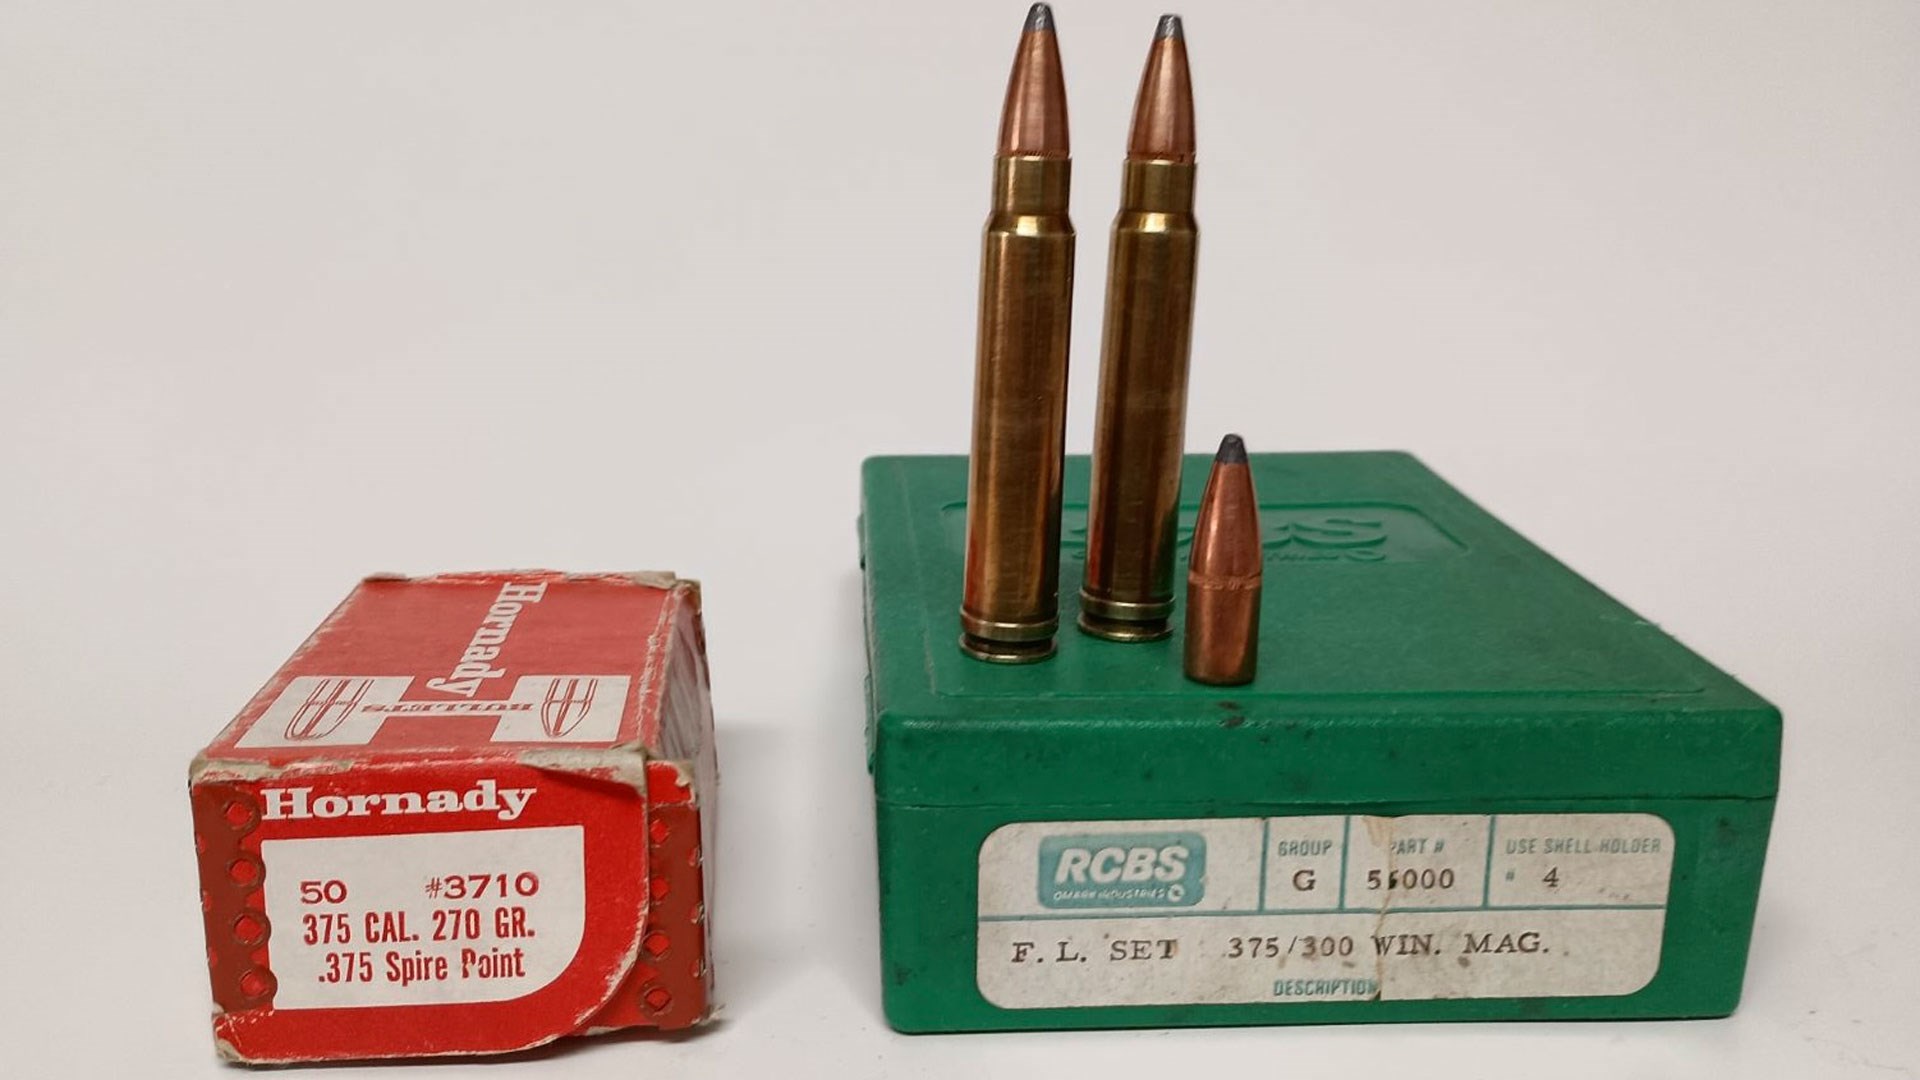 Hornady boxes and dies